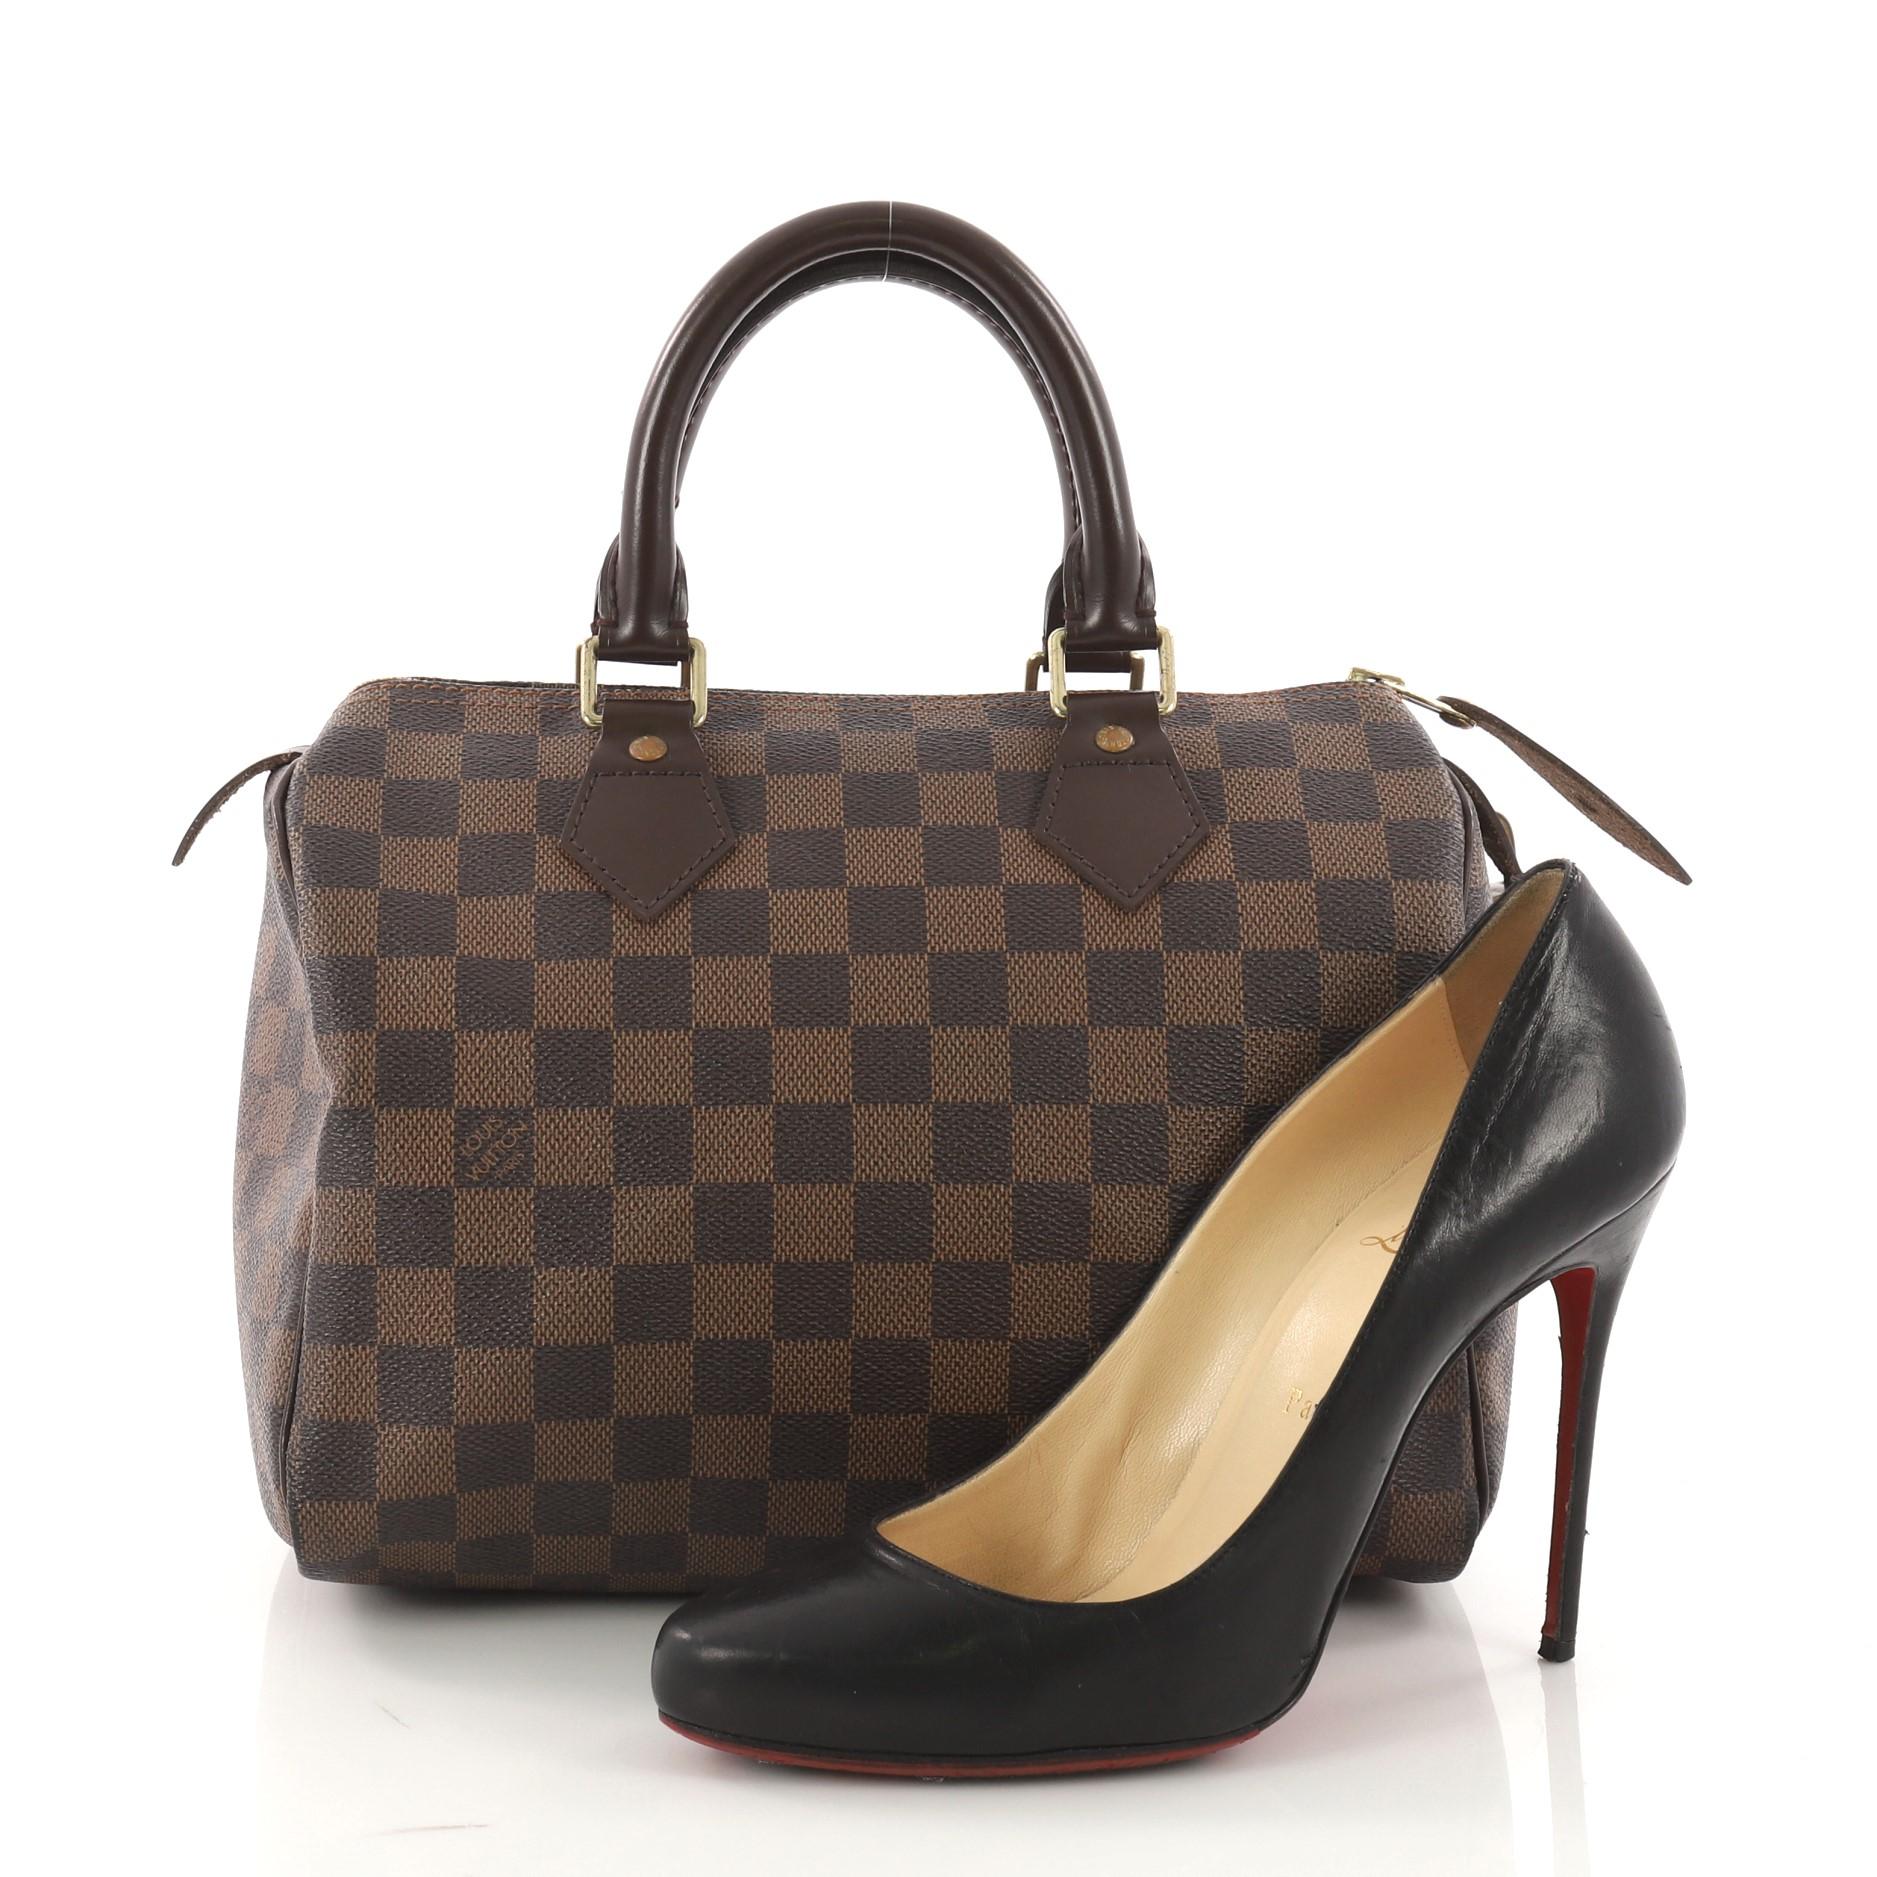 This authentic Louis Vuitton Speedy Handbag Damier 25 is a timeless favorite of many. Constructed from Louis Vuitton's signature damier ebene coated canvas, this iconic Speedy features dual-rolled handles, brown leather trims and gold-tone hardware